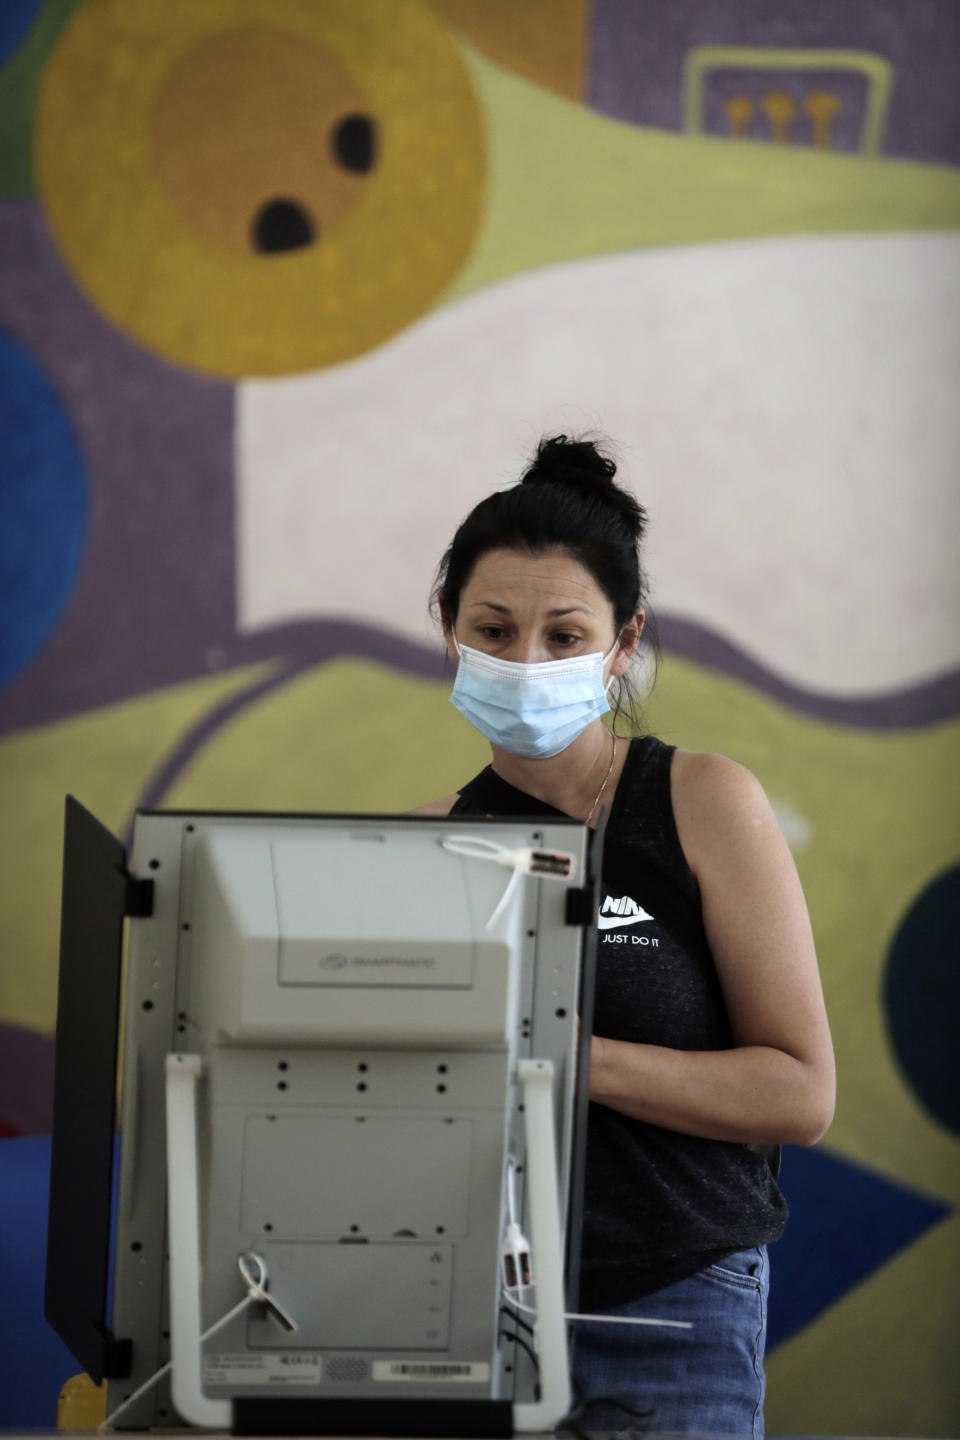 A woman casts her her vote at a polling station in Sofia, Sunday, July 11, 2021. Bulgarians are voting in a snap poll on Sunday after a previous election in April produced a fragmented parliament that failed to form a viable coalition government. (AP Photo/Valentina Petrova)